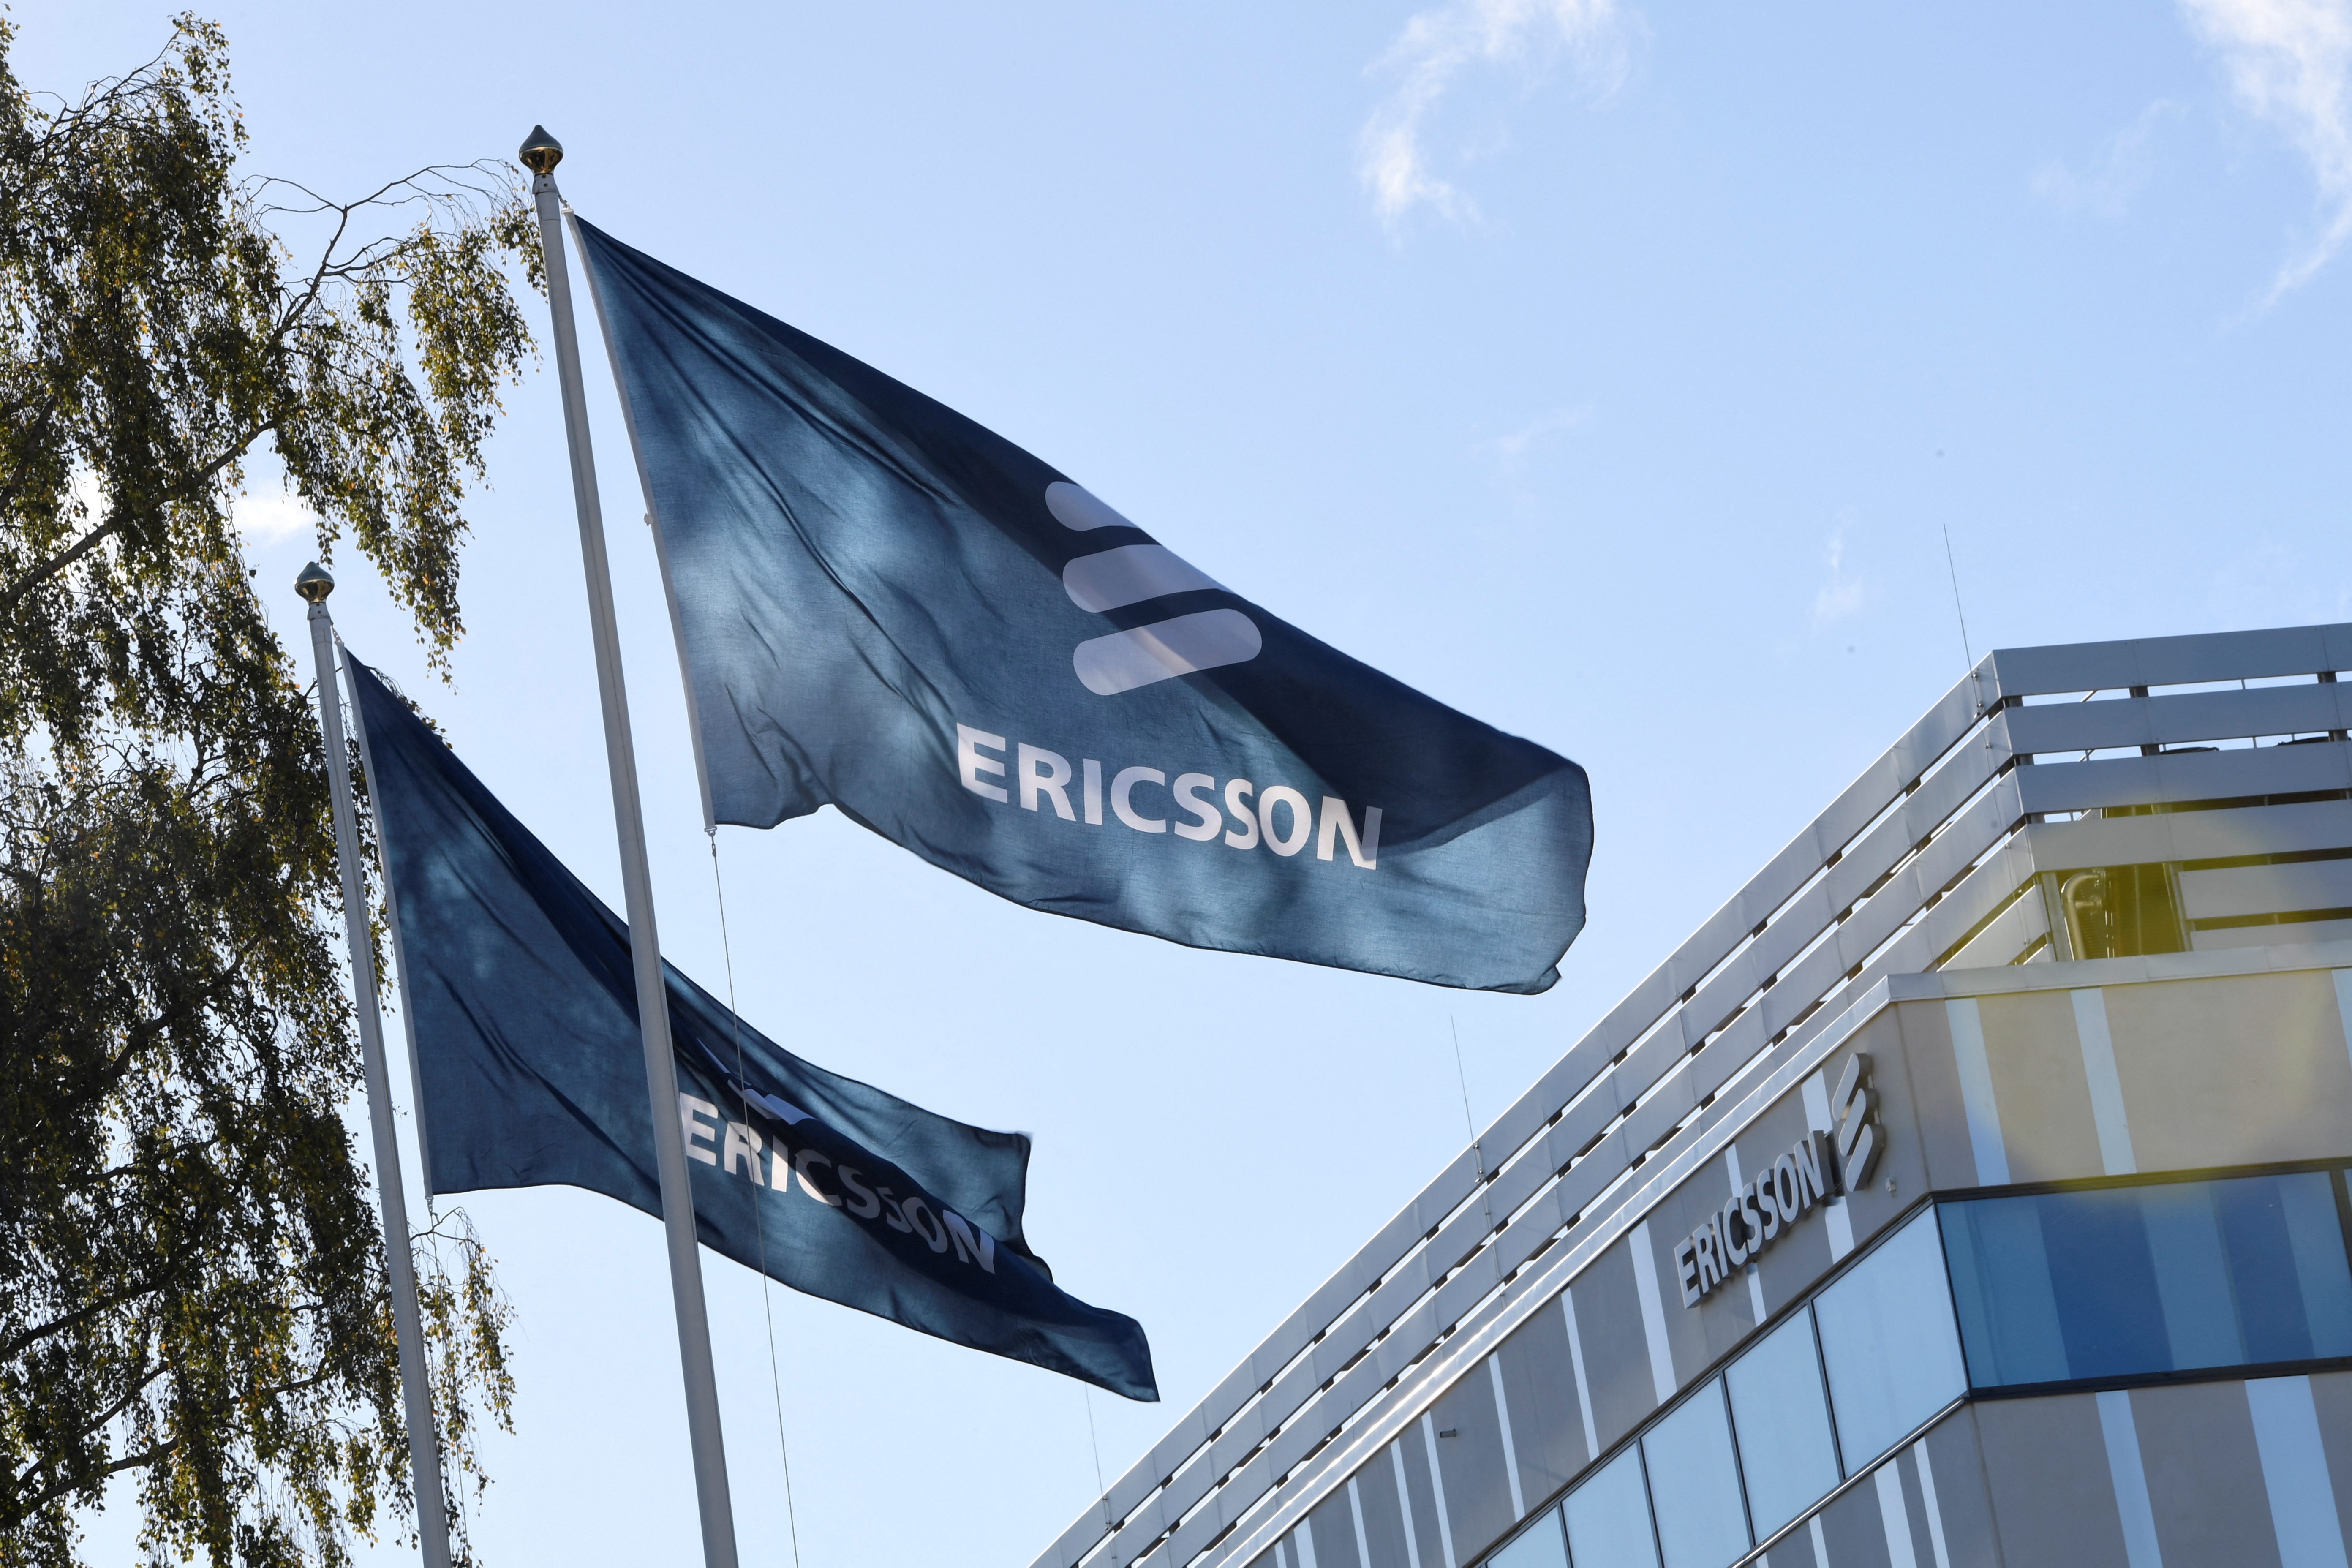 Flags with Ericsson logo are pictured outside company's head office in Stockholm